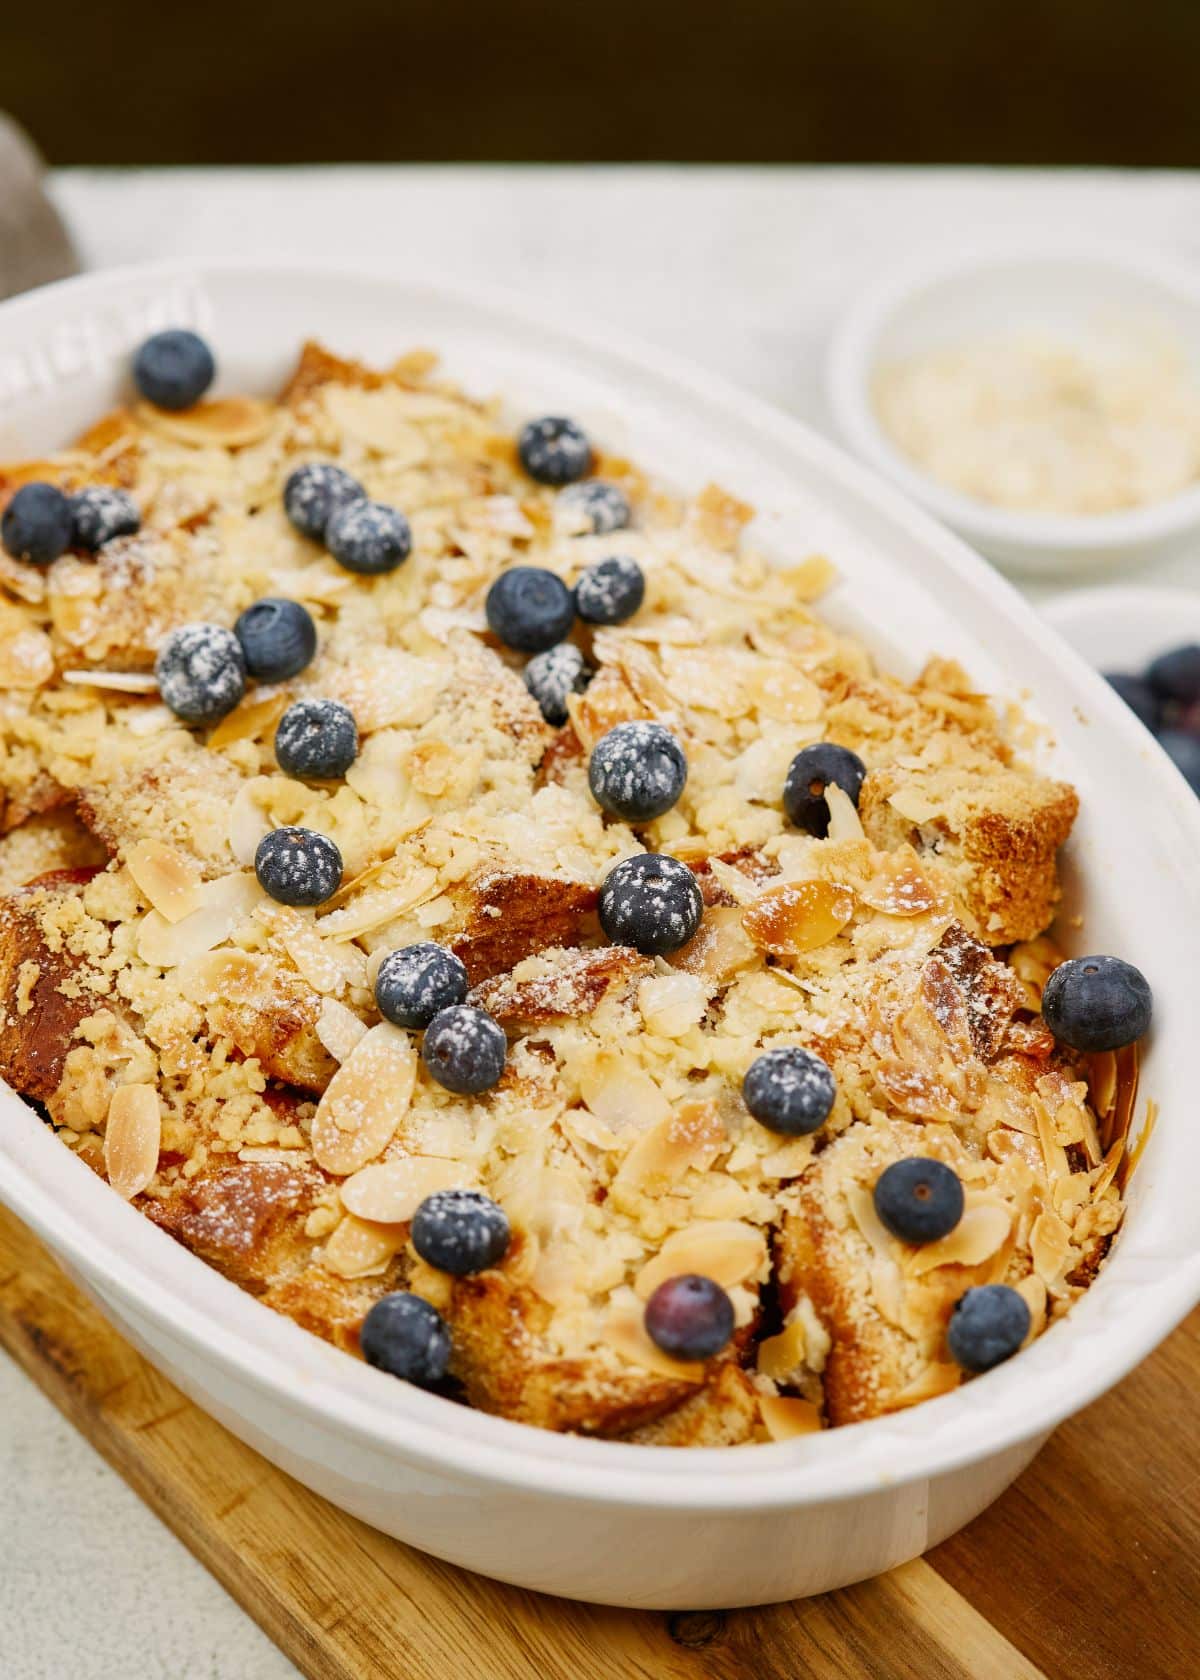 oval baking dish of vegan french toast casserole sitting on a wood cutting board